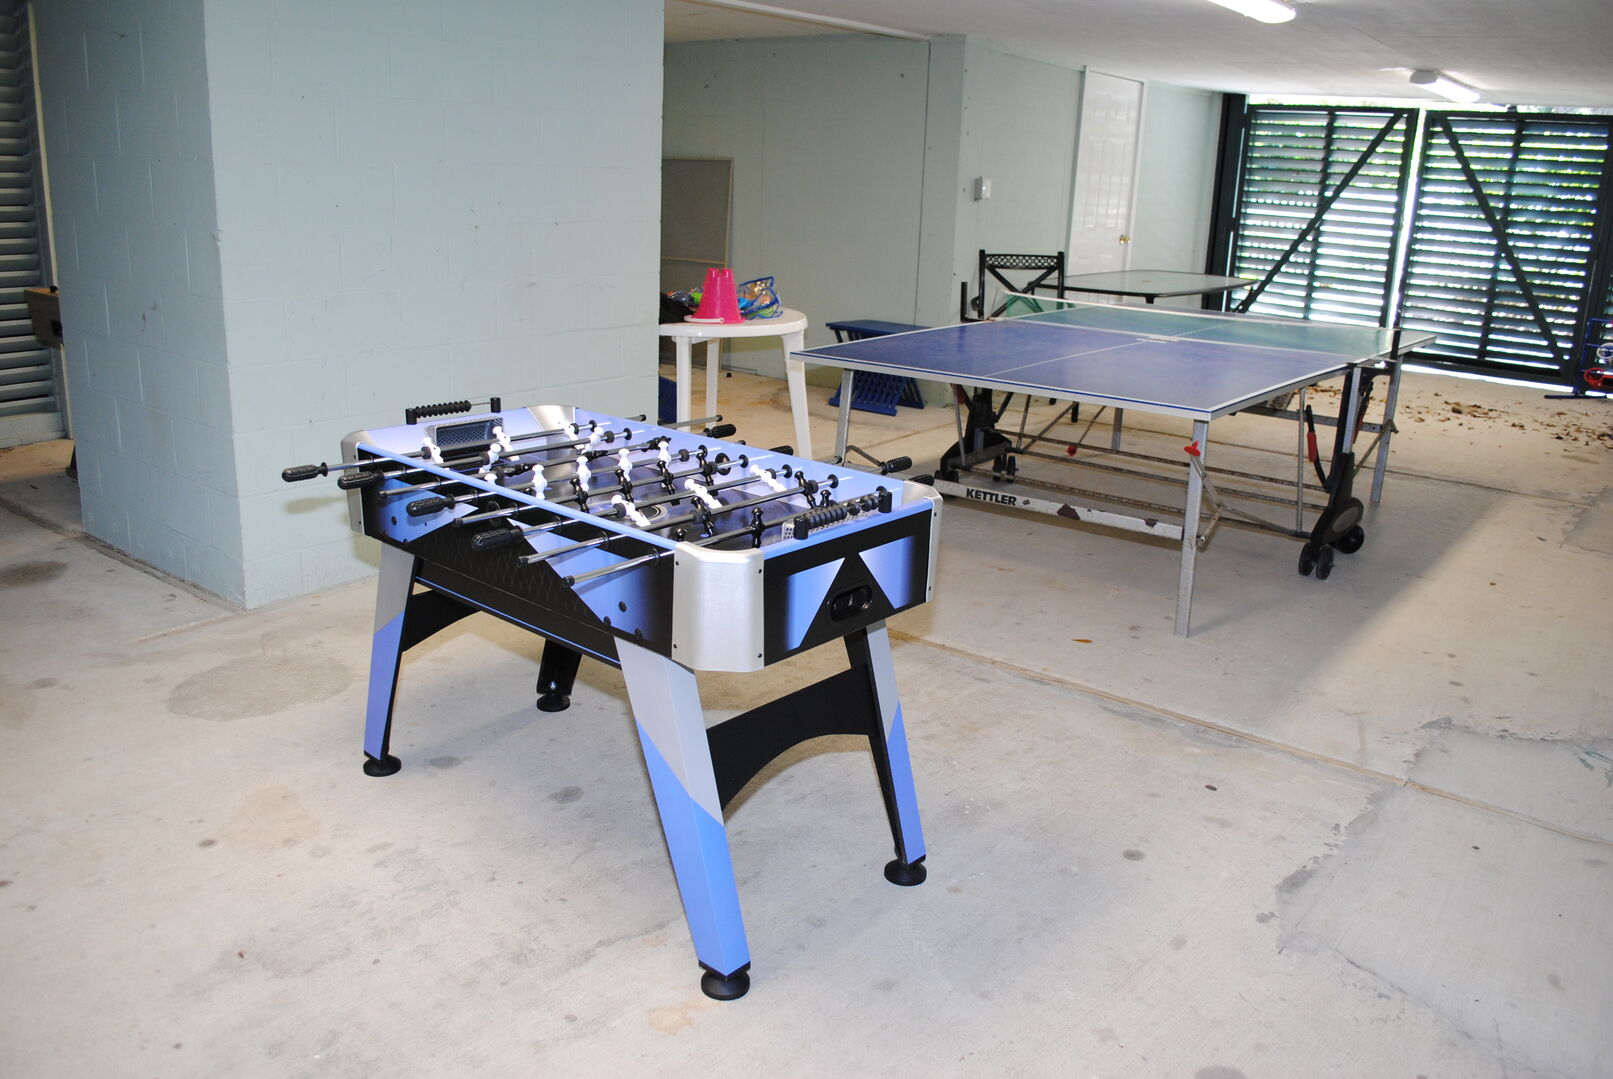 Ground Level - Foosball and Ping Pong